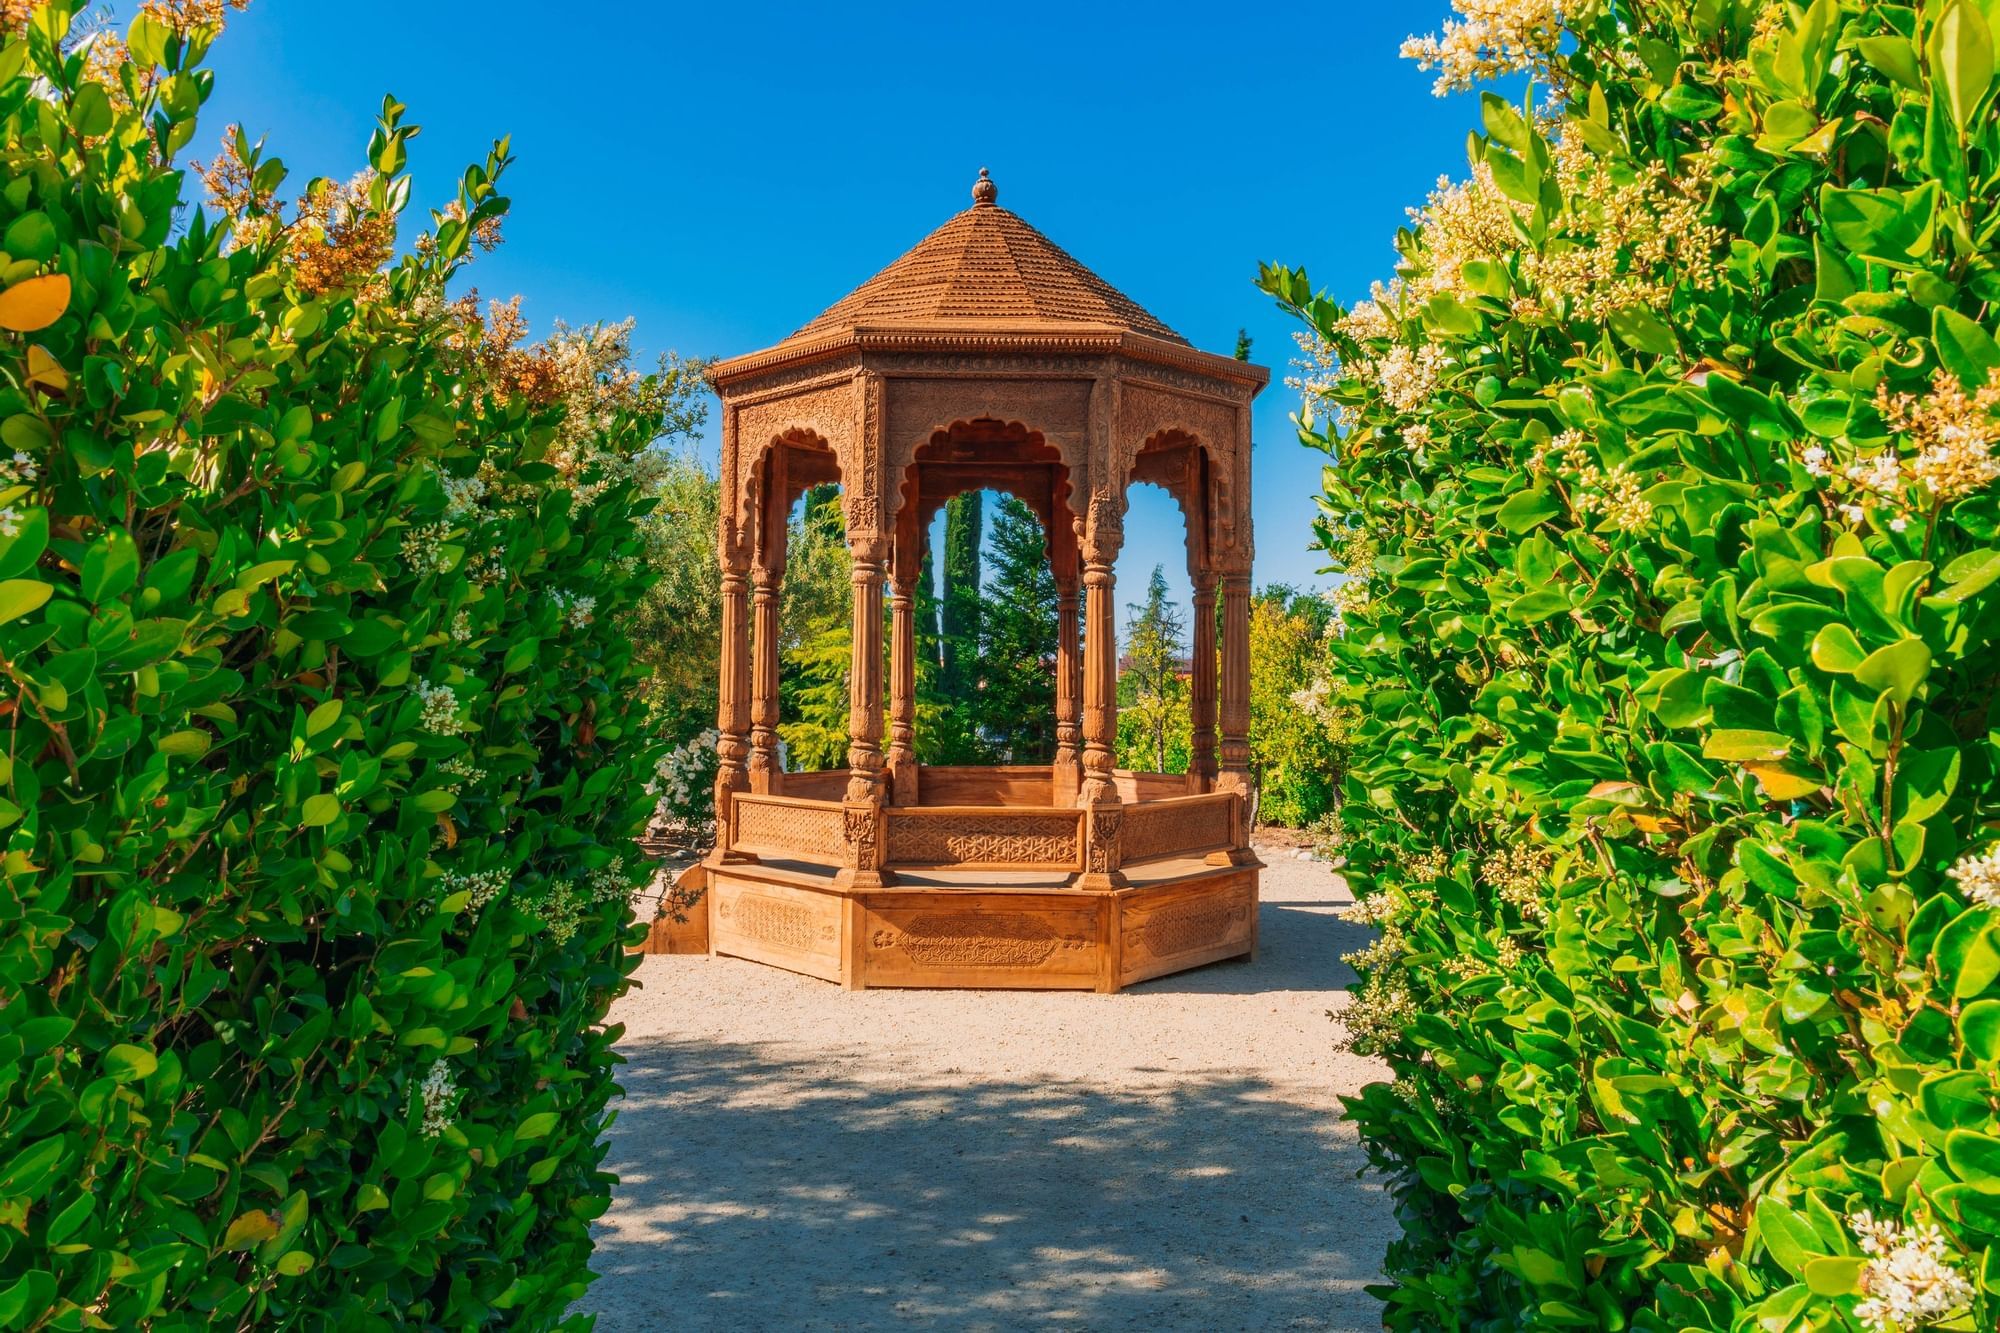 Wooden gazebo with intricate details in a garden